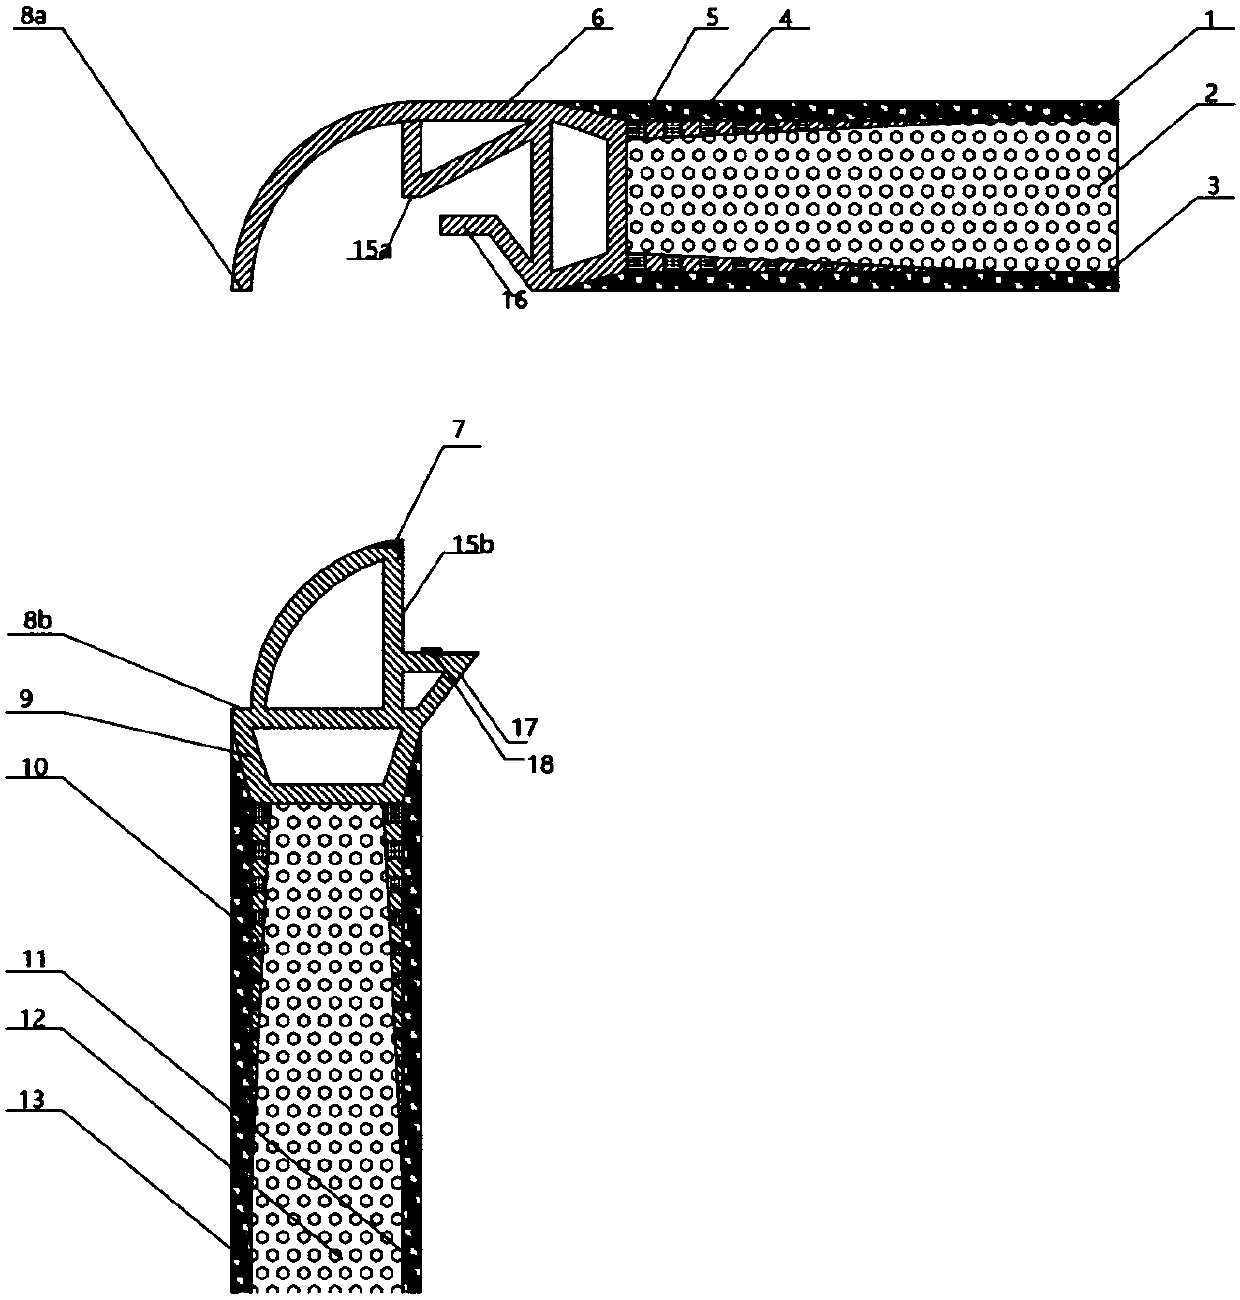 L-shaped composite material laminboard connecting structure with flexible metal connector